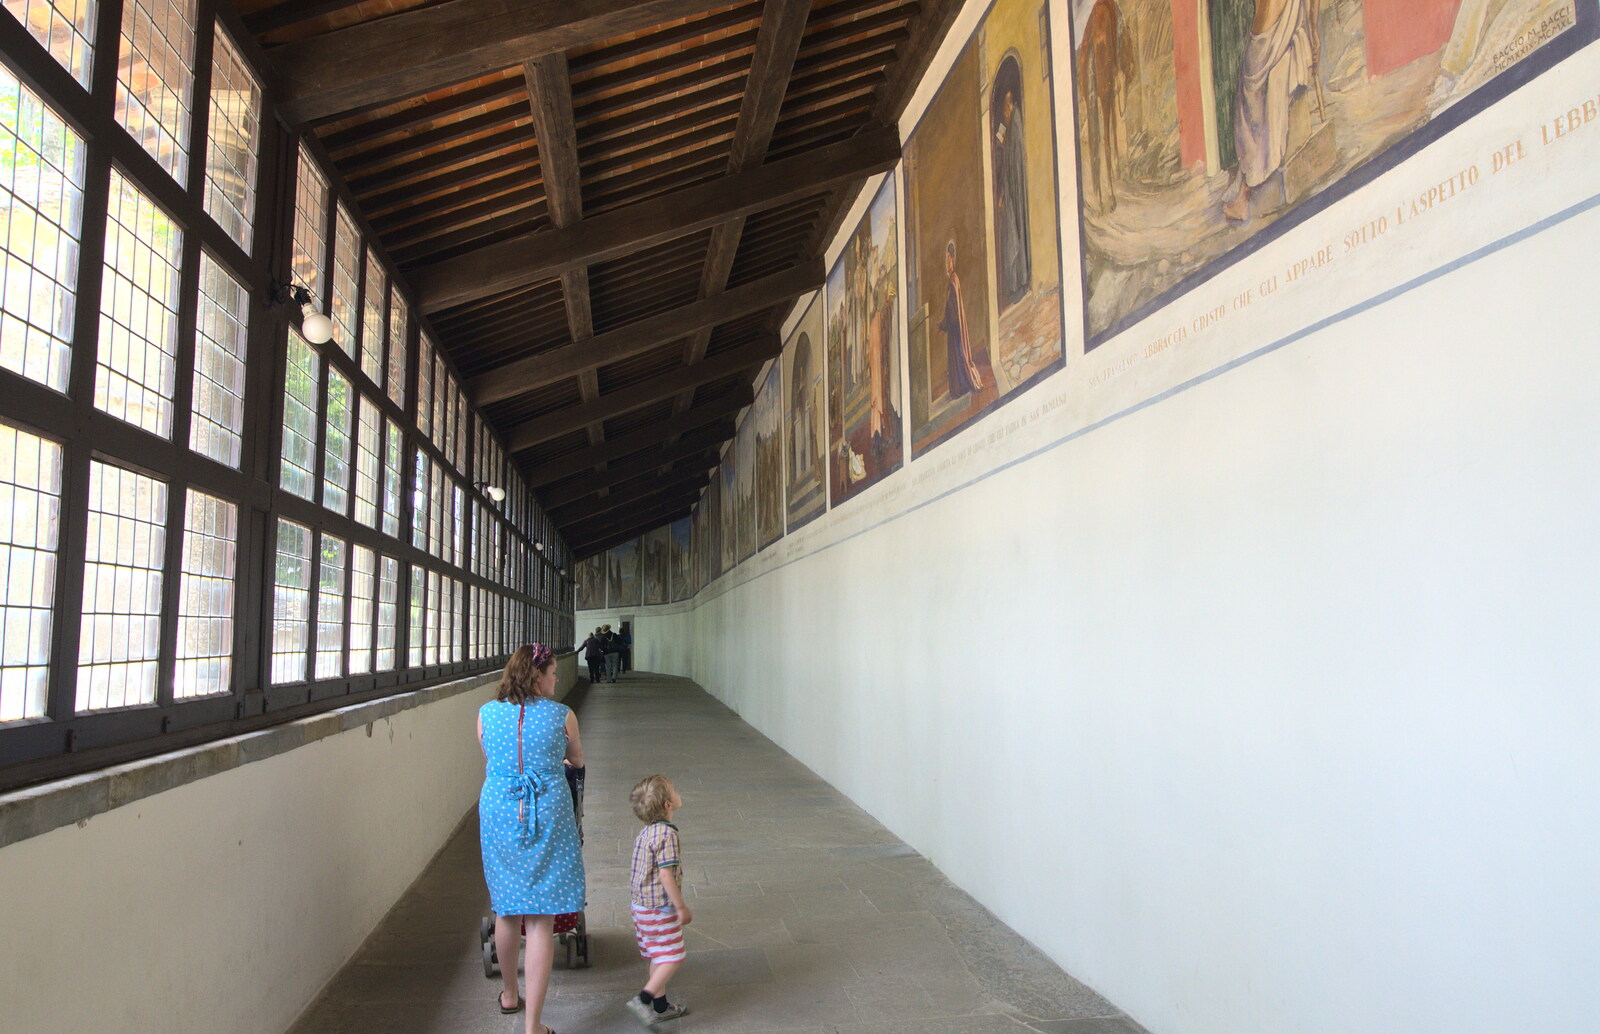 We walk through some sort of gallery from La Verna Monastery and the Fireflies of Tuscany, Italy - 14th June 2013